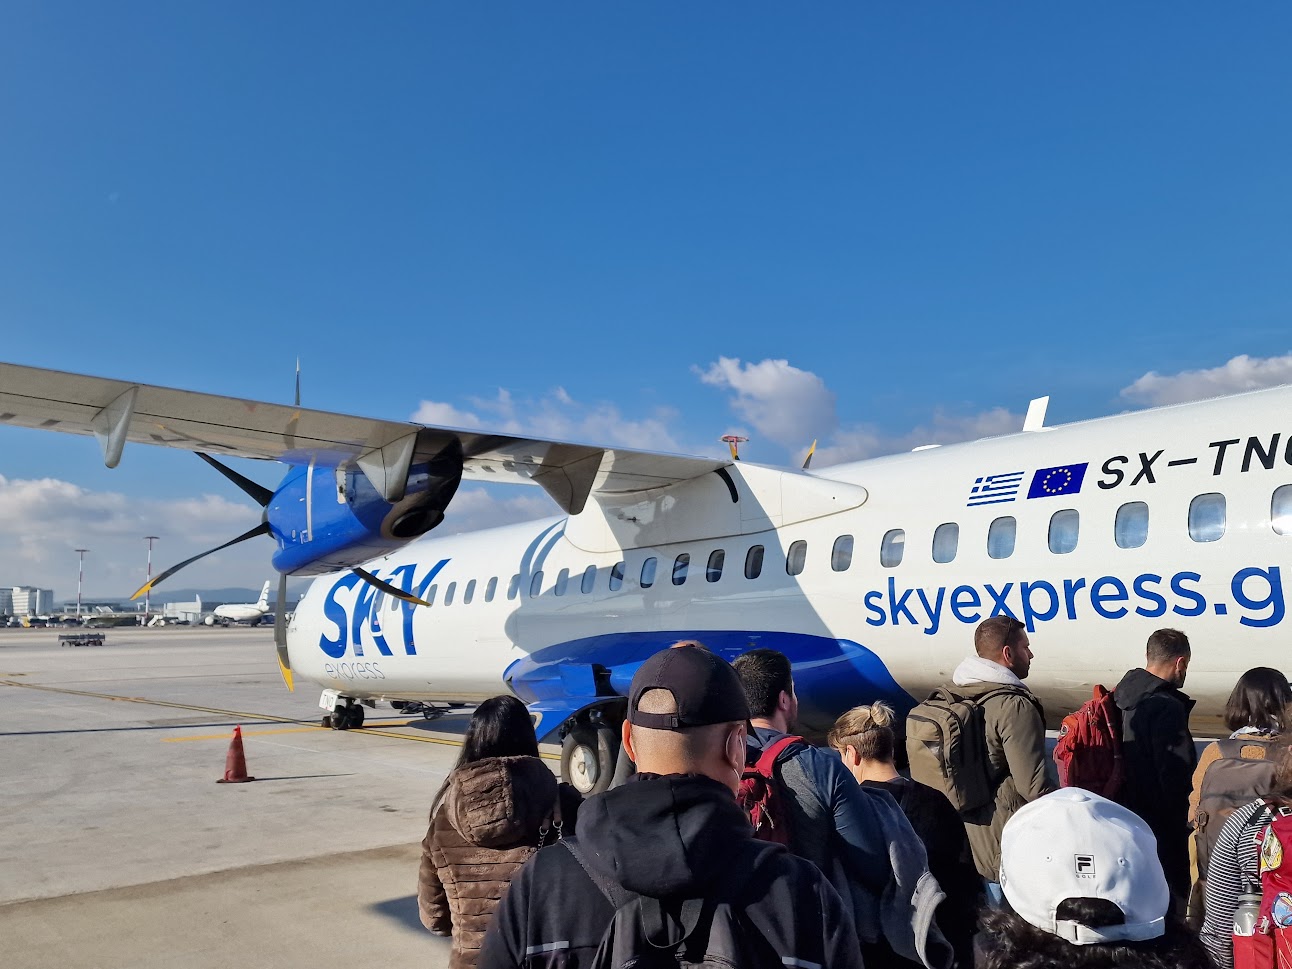 Sky Express flight from Athens to Chania in Crete